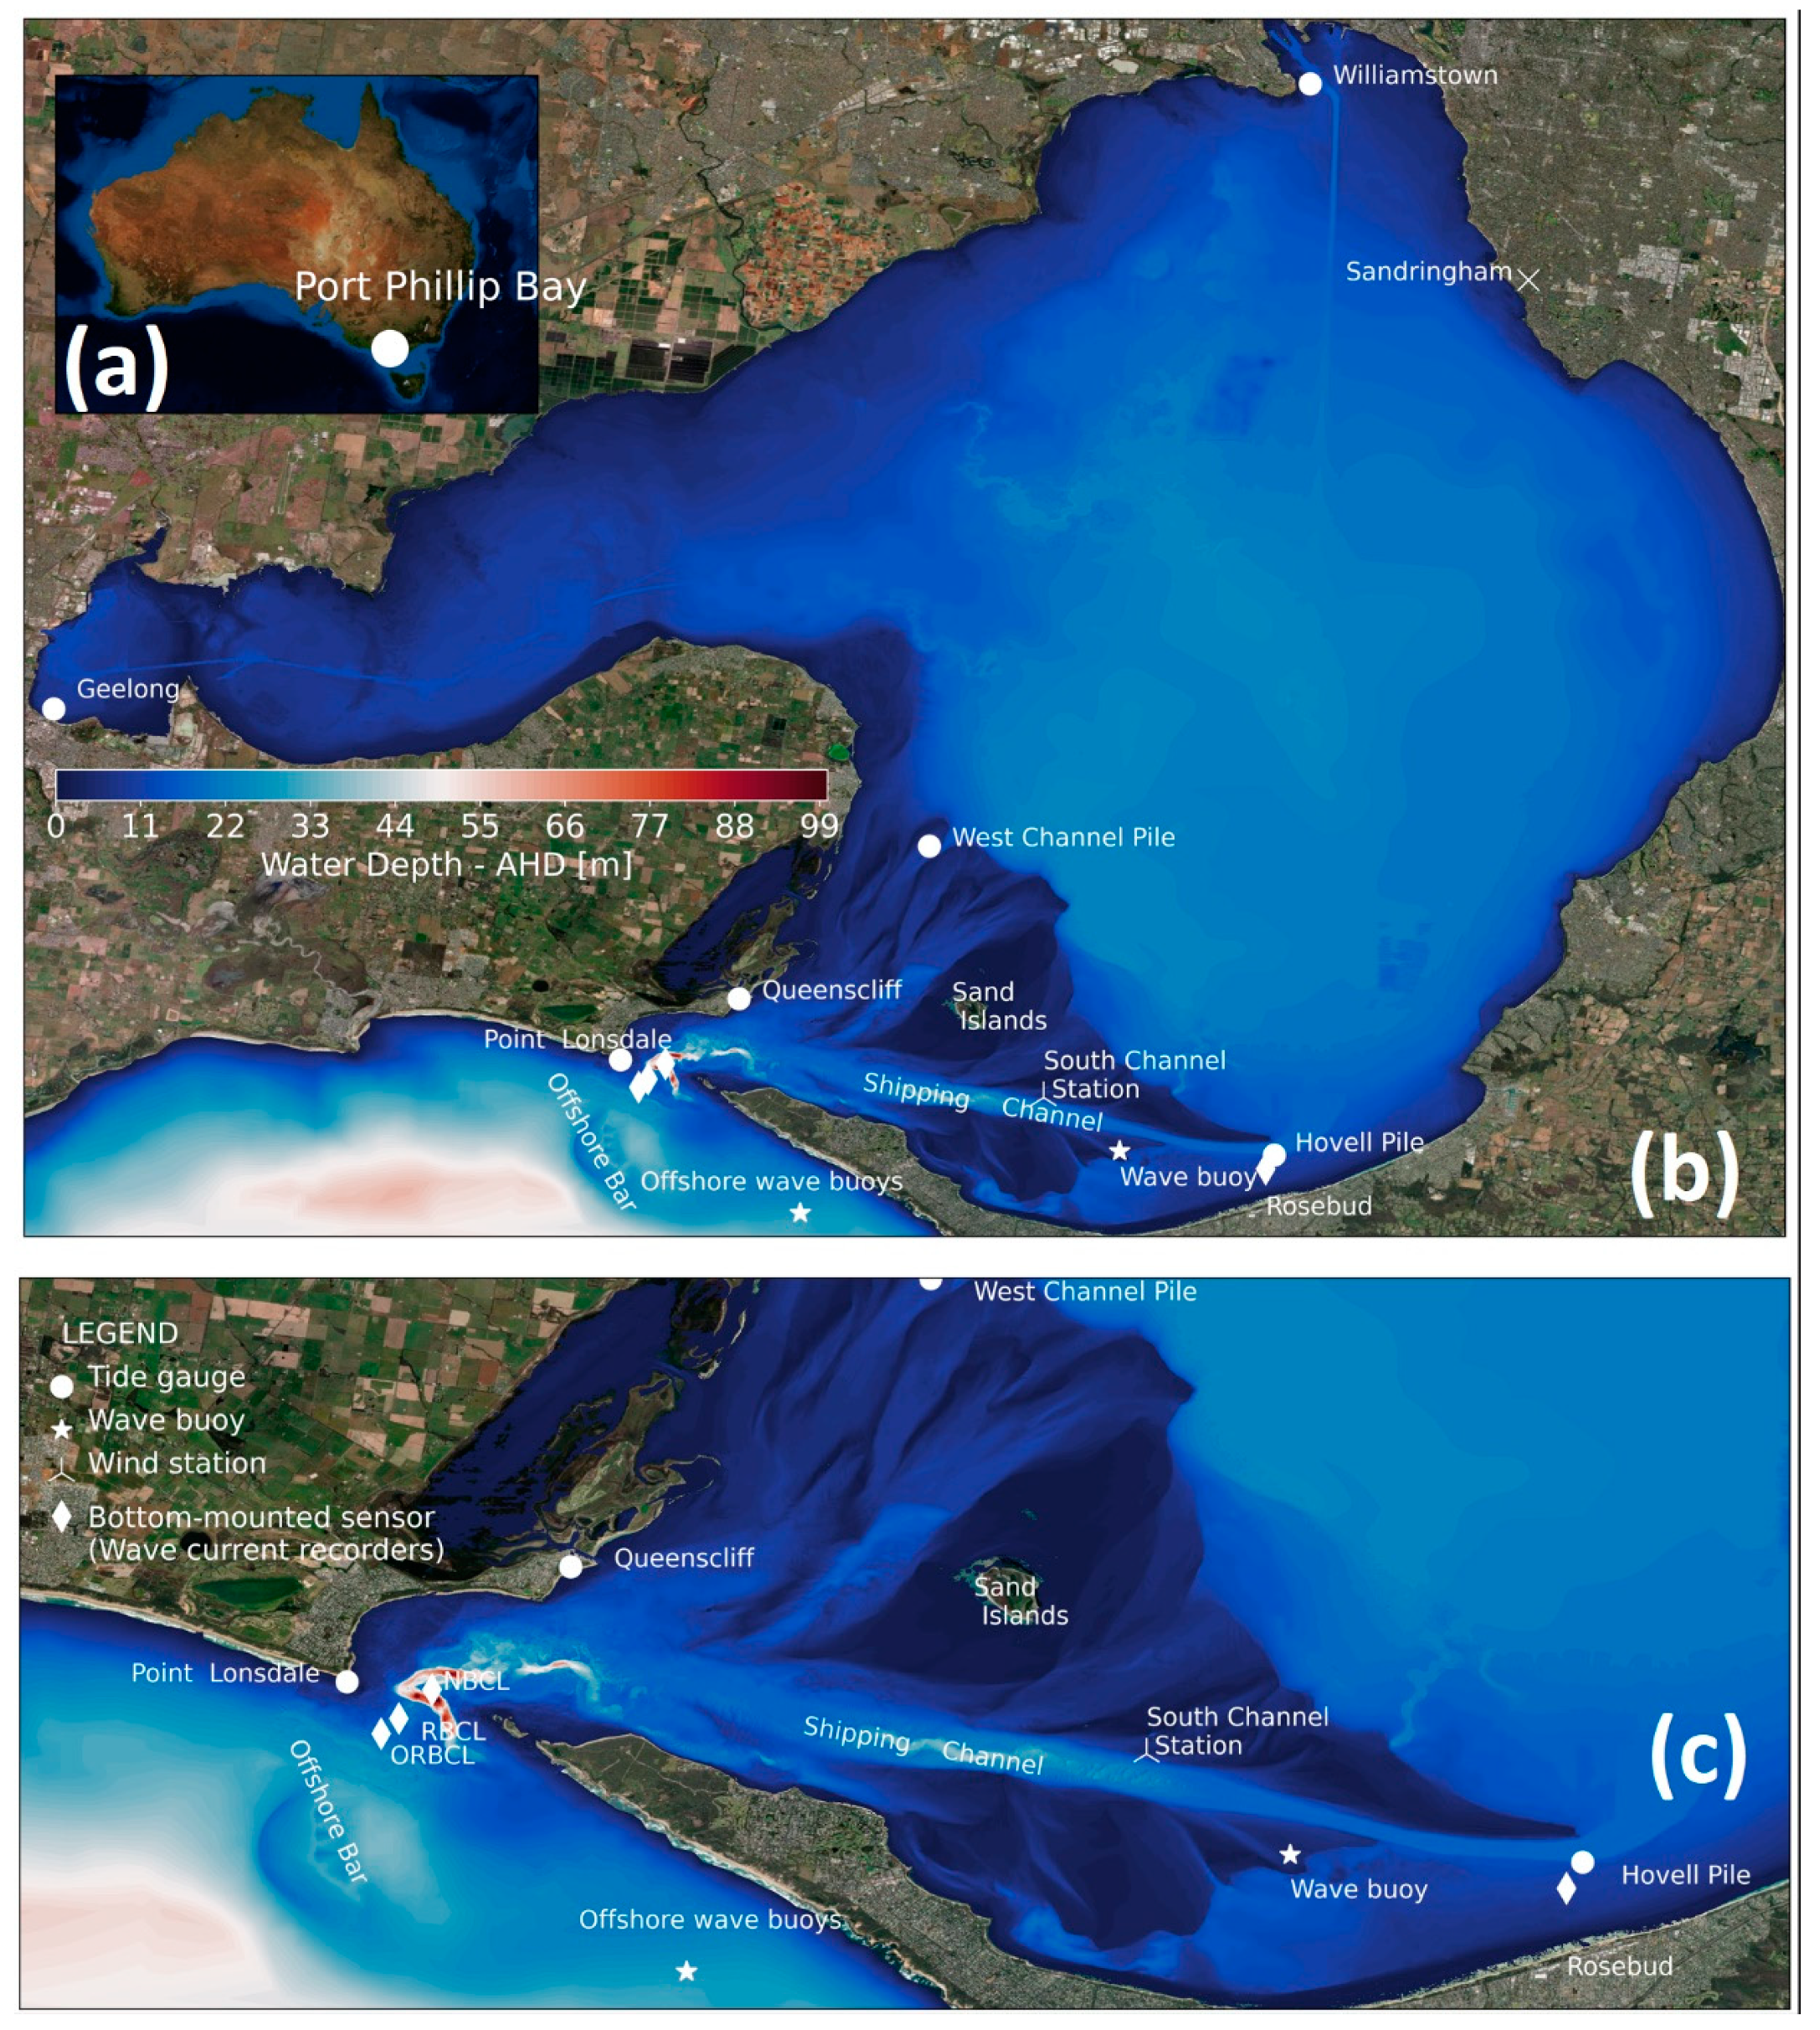 JMSE | Free Full-Text | Hydrodynamic Climate of Port Phillip Bay